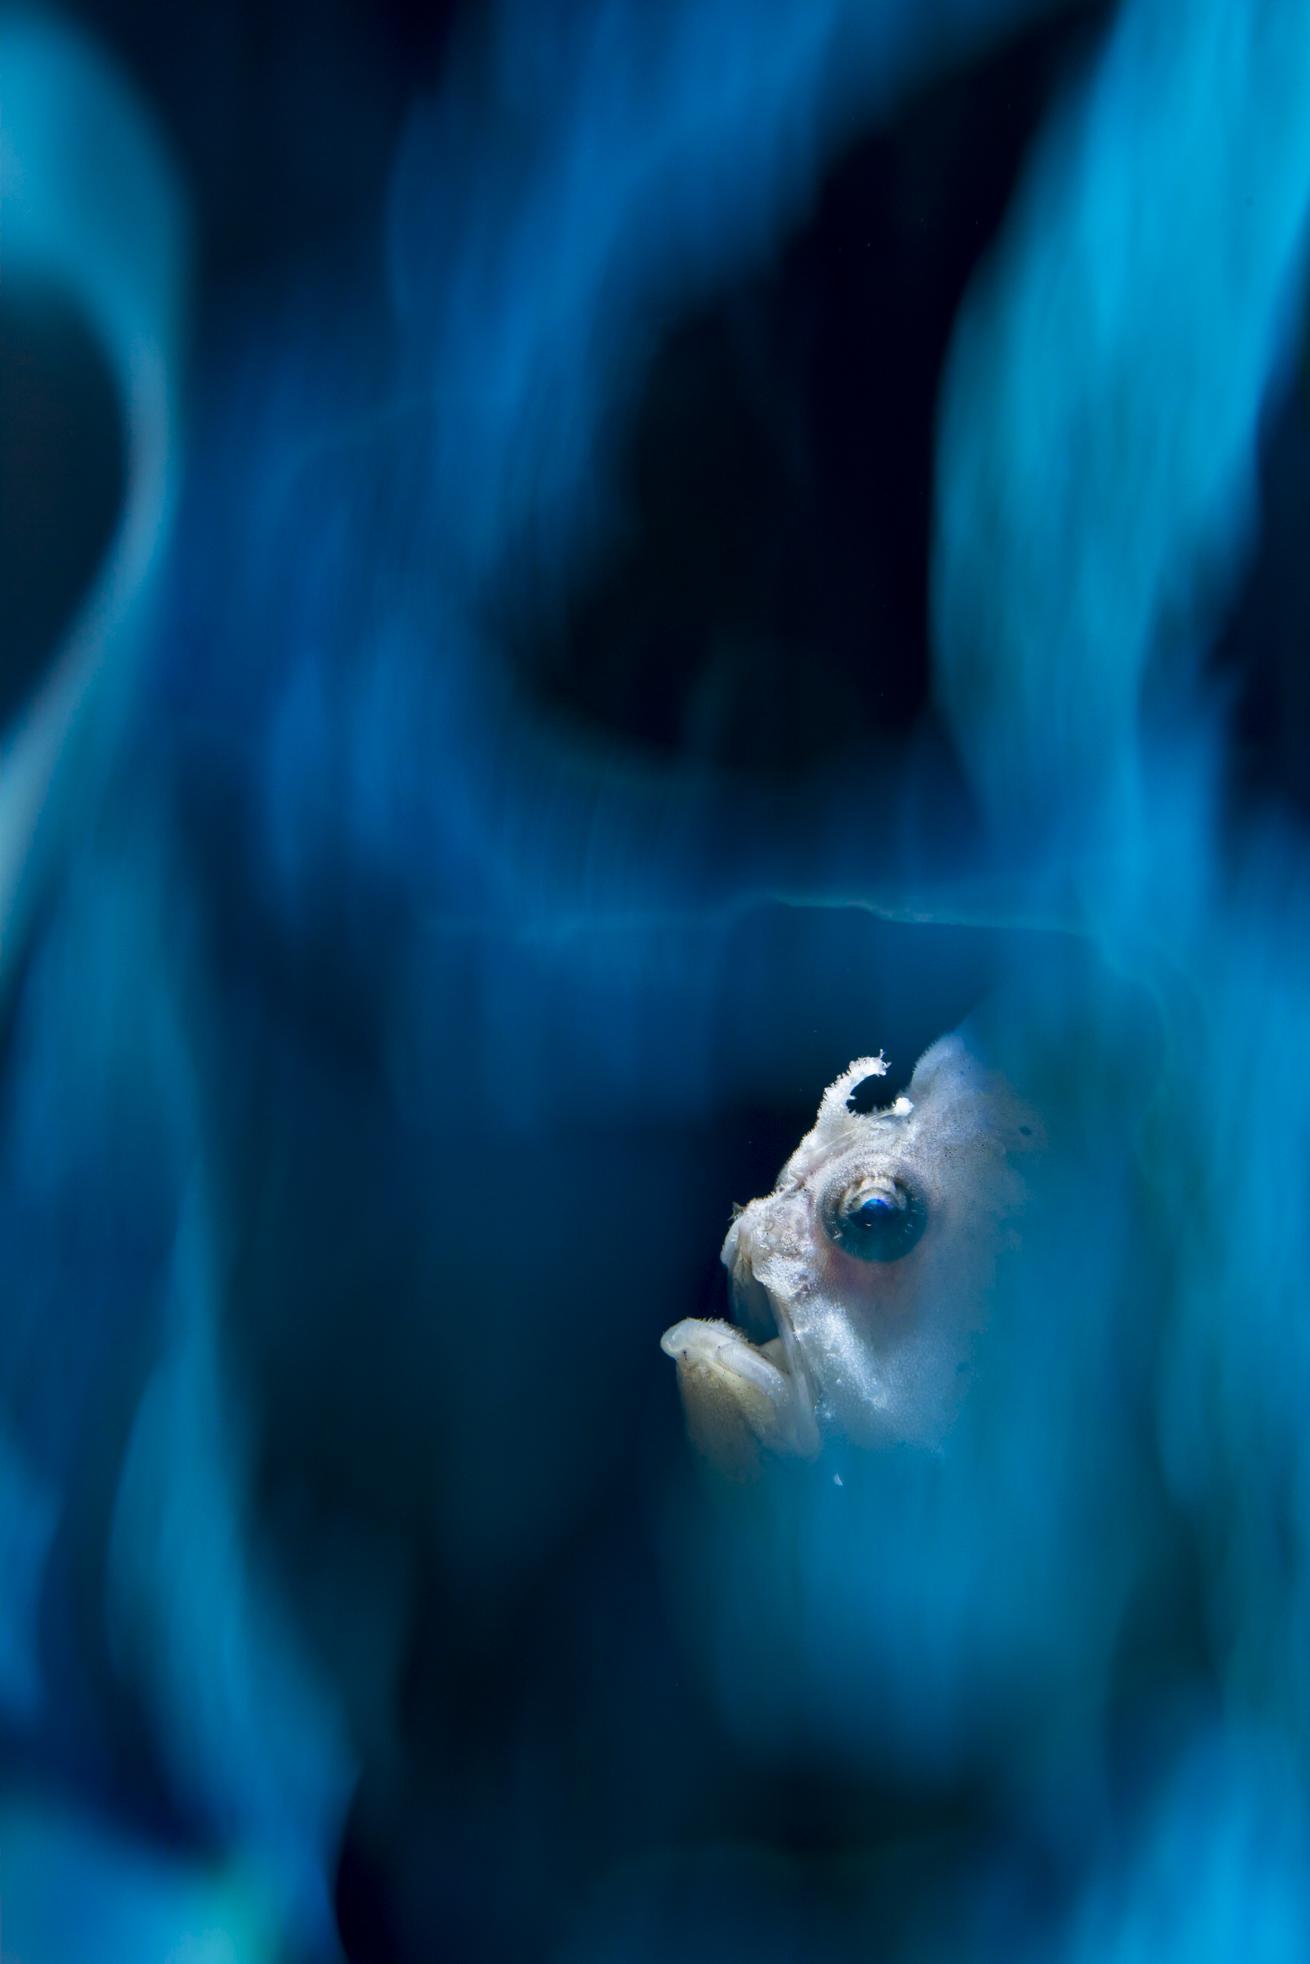 Blue Smoke - A frogfish waits for prey among blue sponges in Indonesia. Lit using a snoot and slow shutter speed for  background.